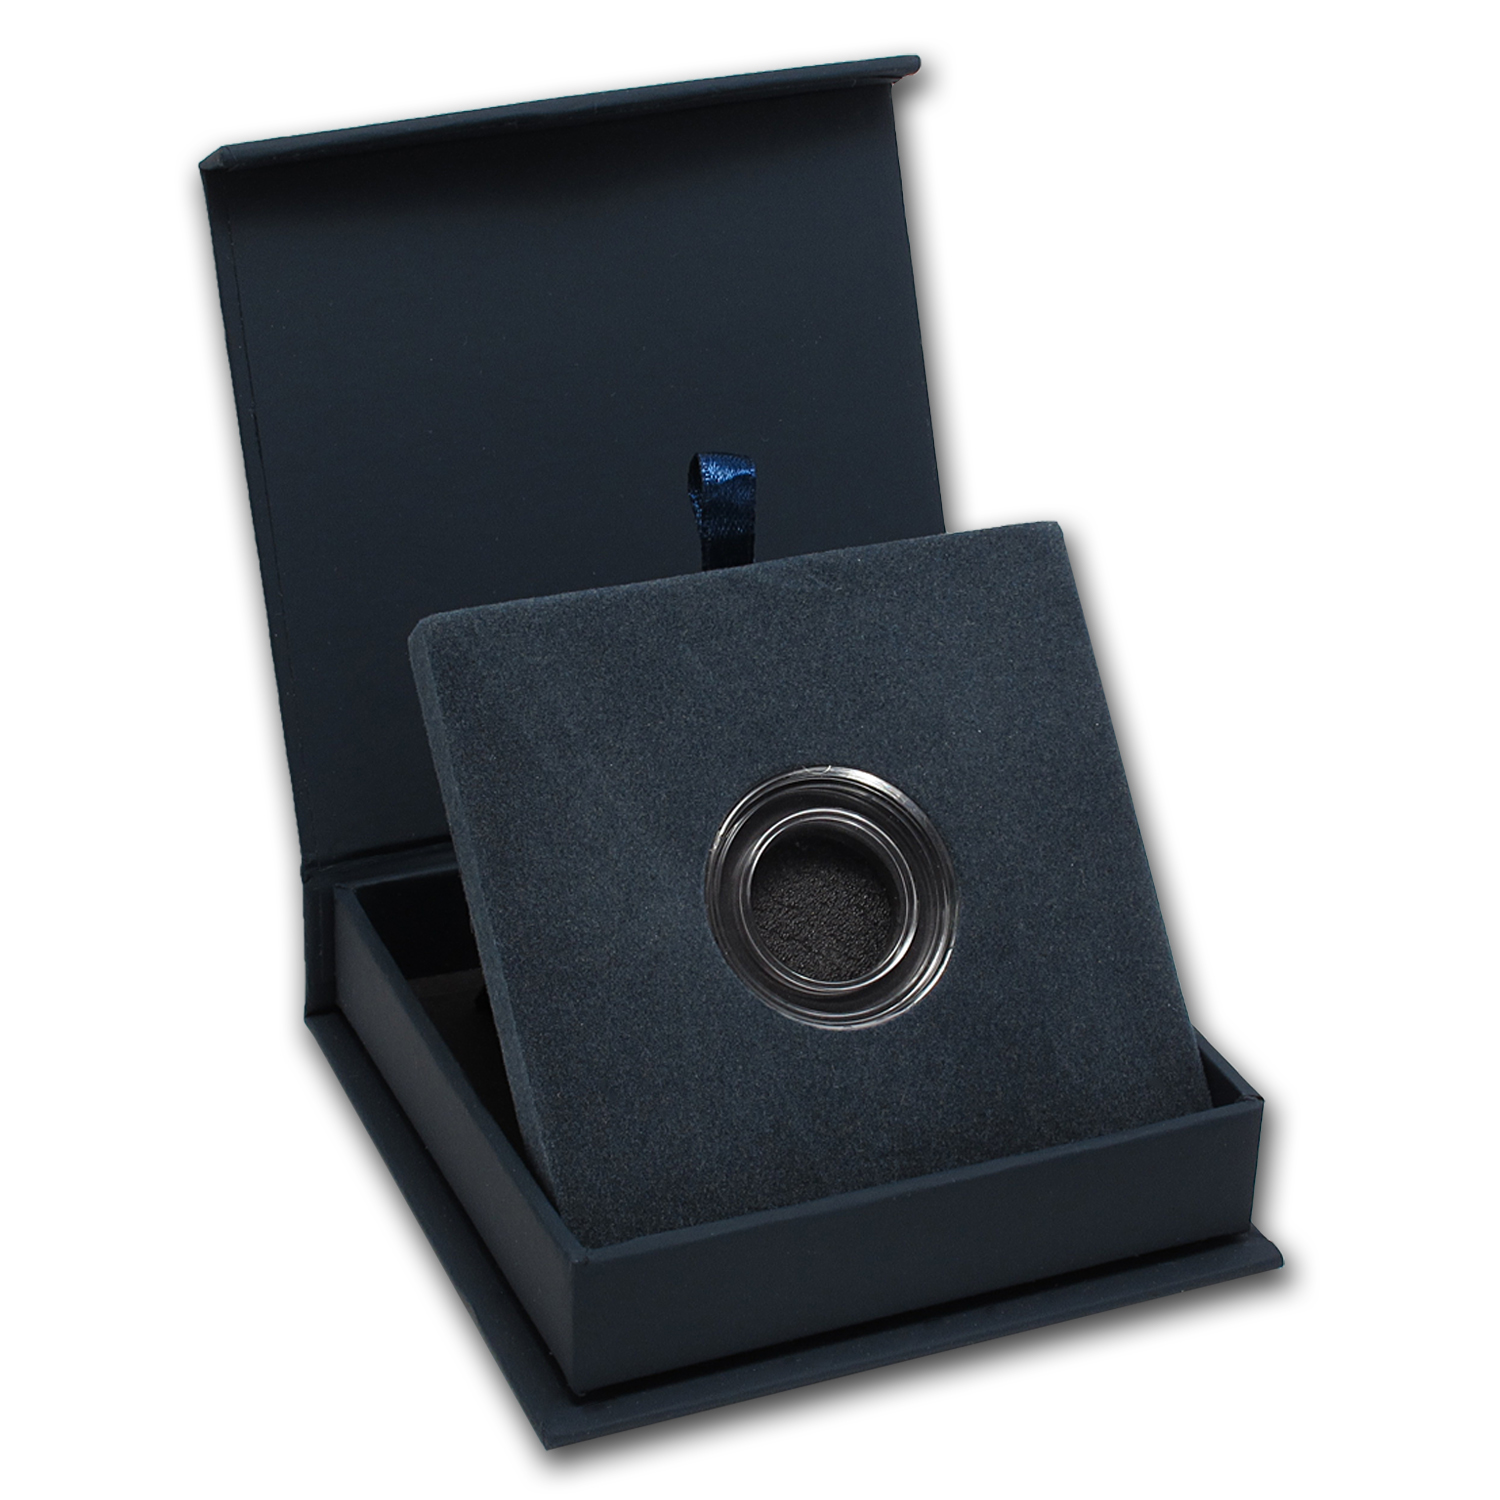 Buy APMEX Gift Box - Includes 19 mm Direct Fit Air-Tite Holder - Click Image to Close